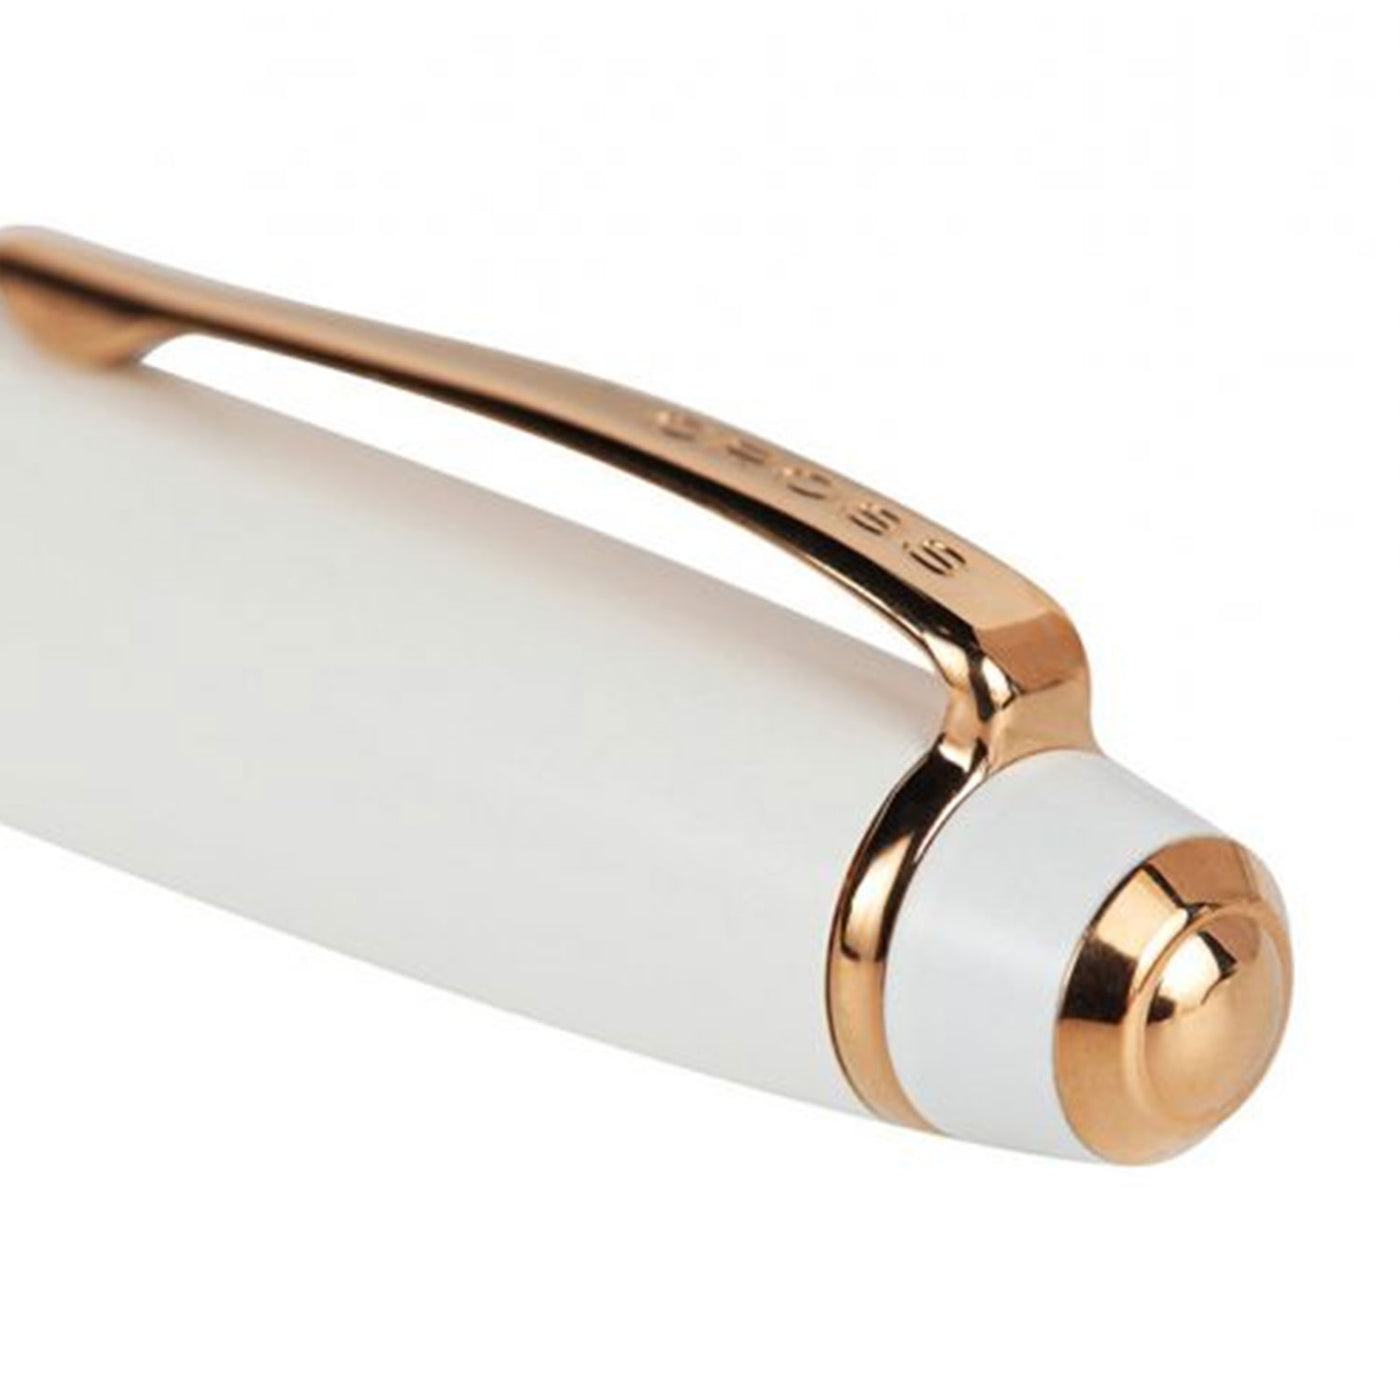 Cross Bailey Fountain Pen - Pearlescent White RGT 4